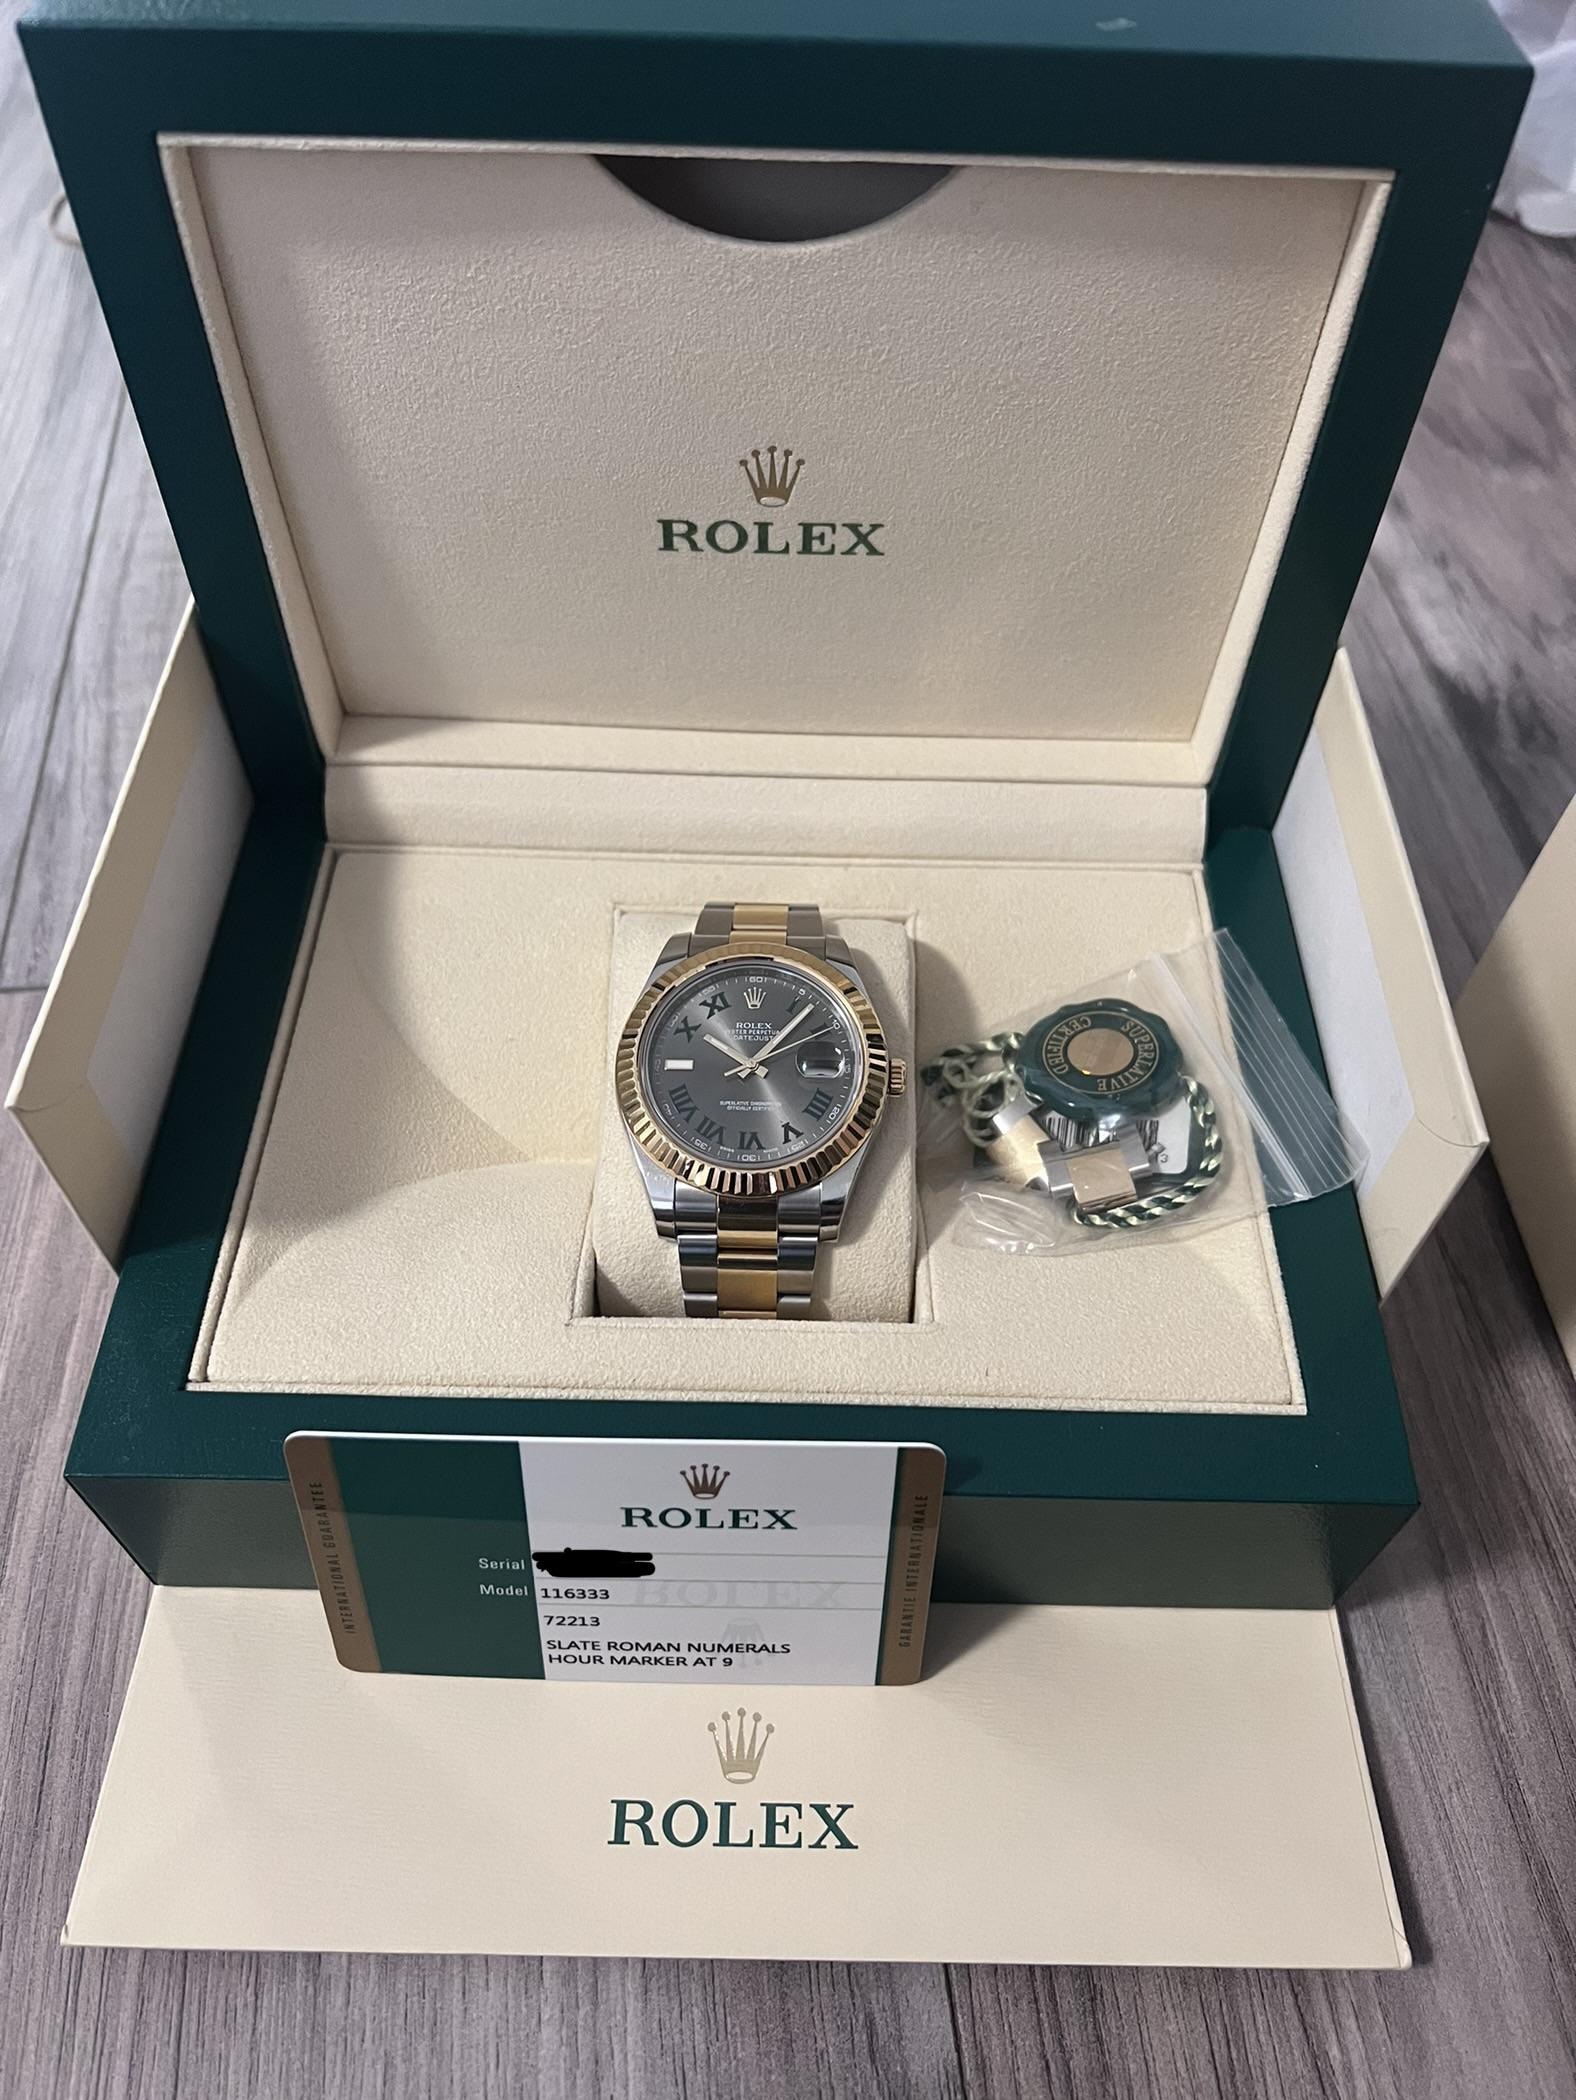 Rolex Medium Box (Oyster M 39139.04) Complete with Outer Box and 